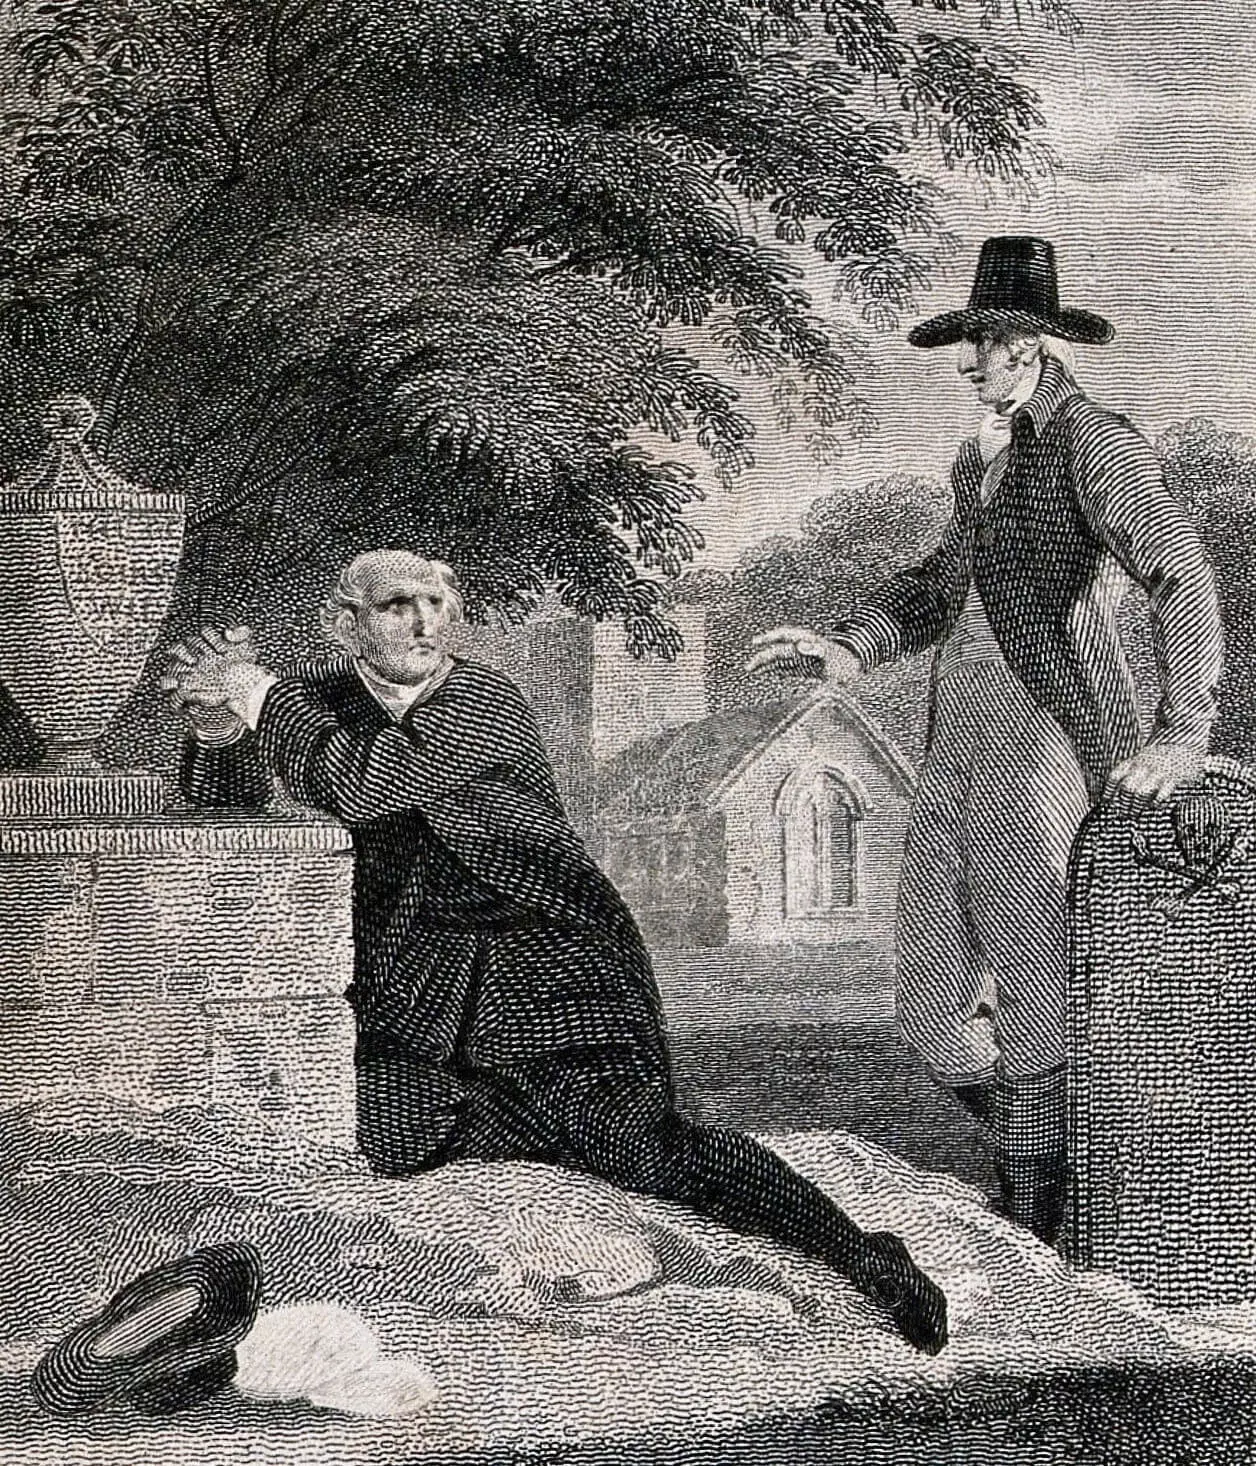 A man praying at a grave beneath a yew tree